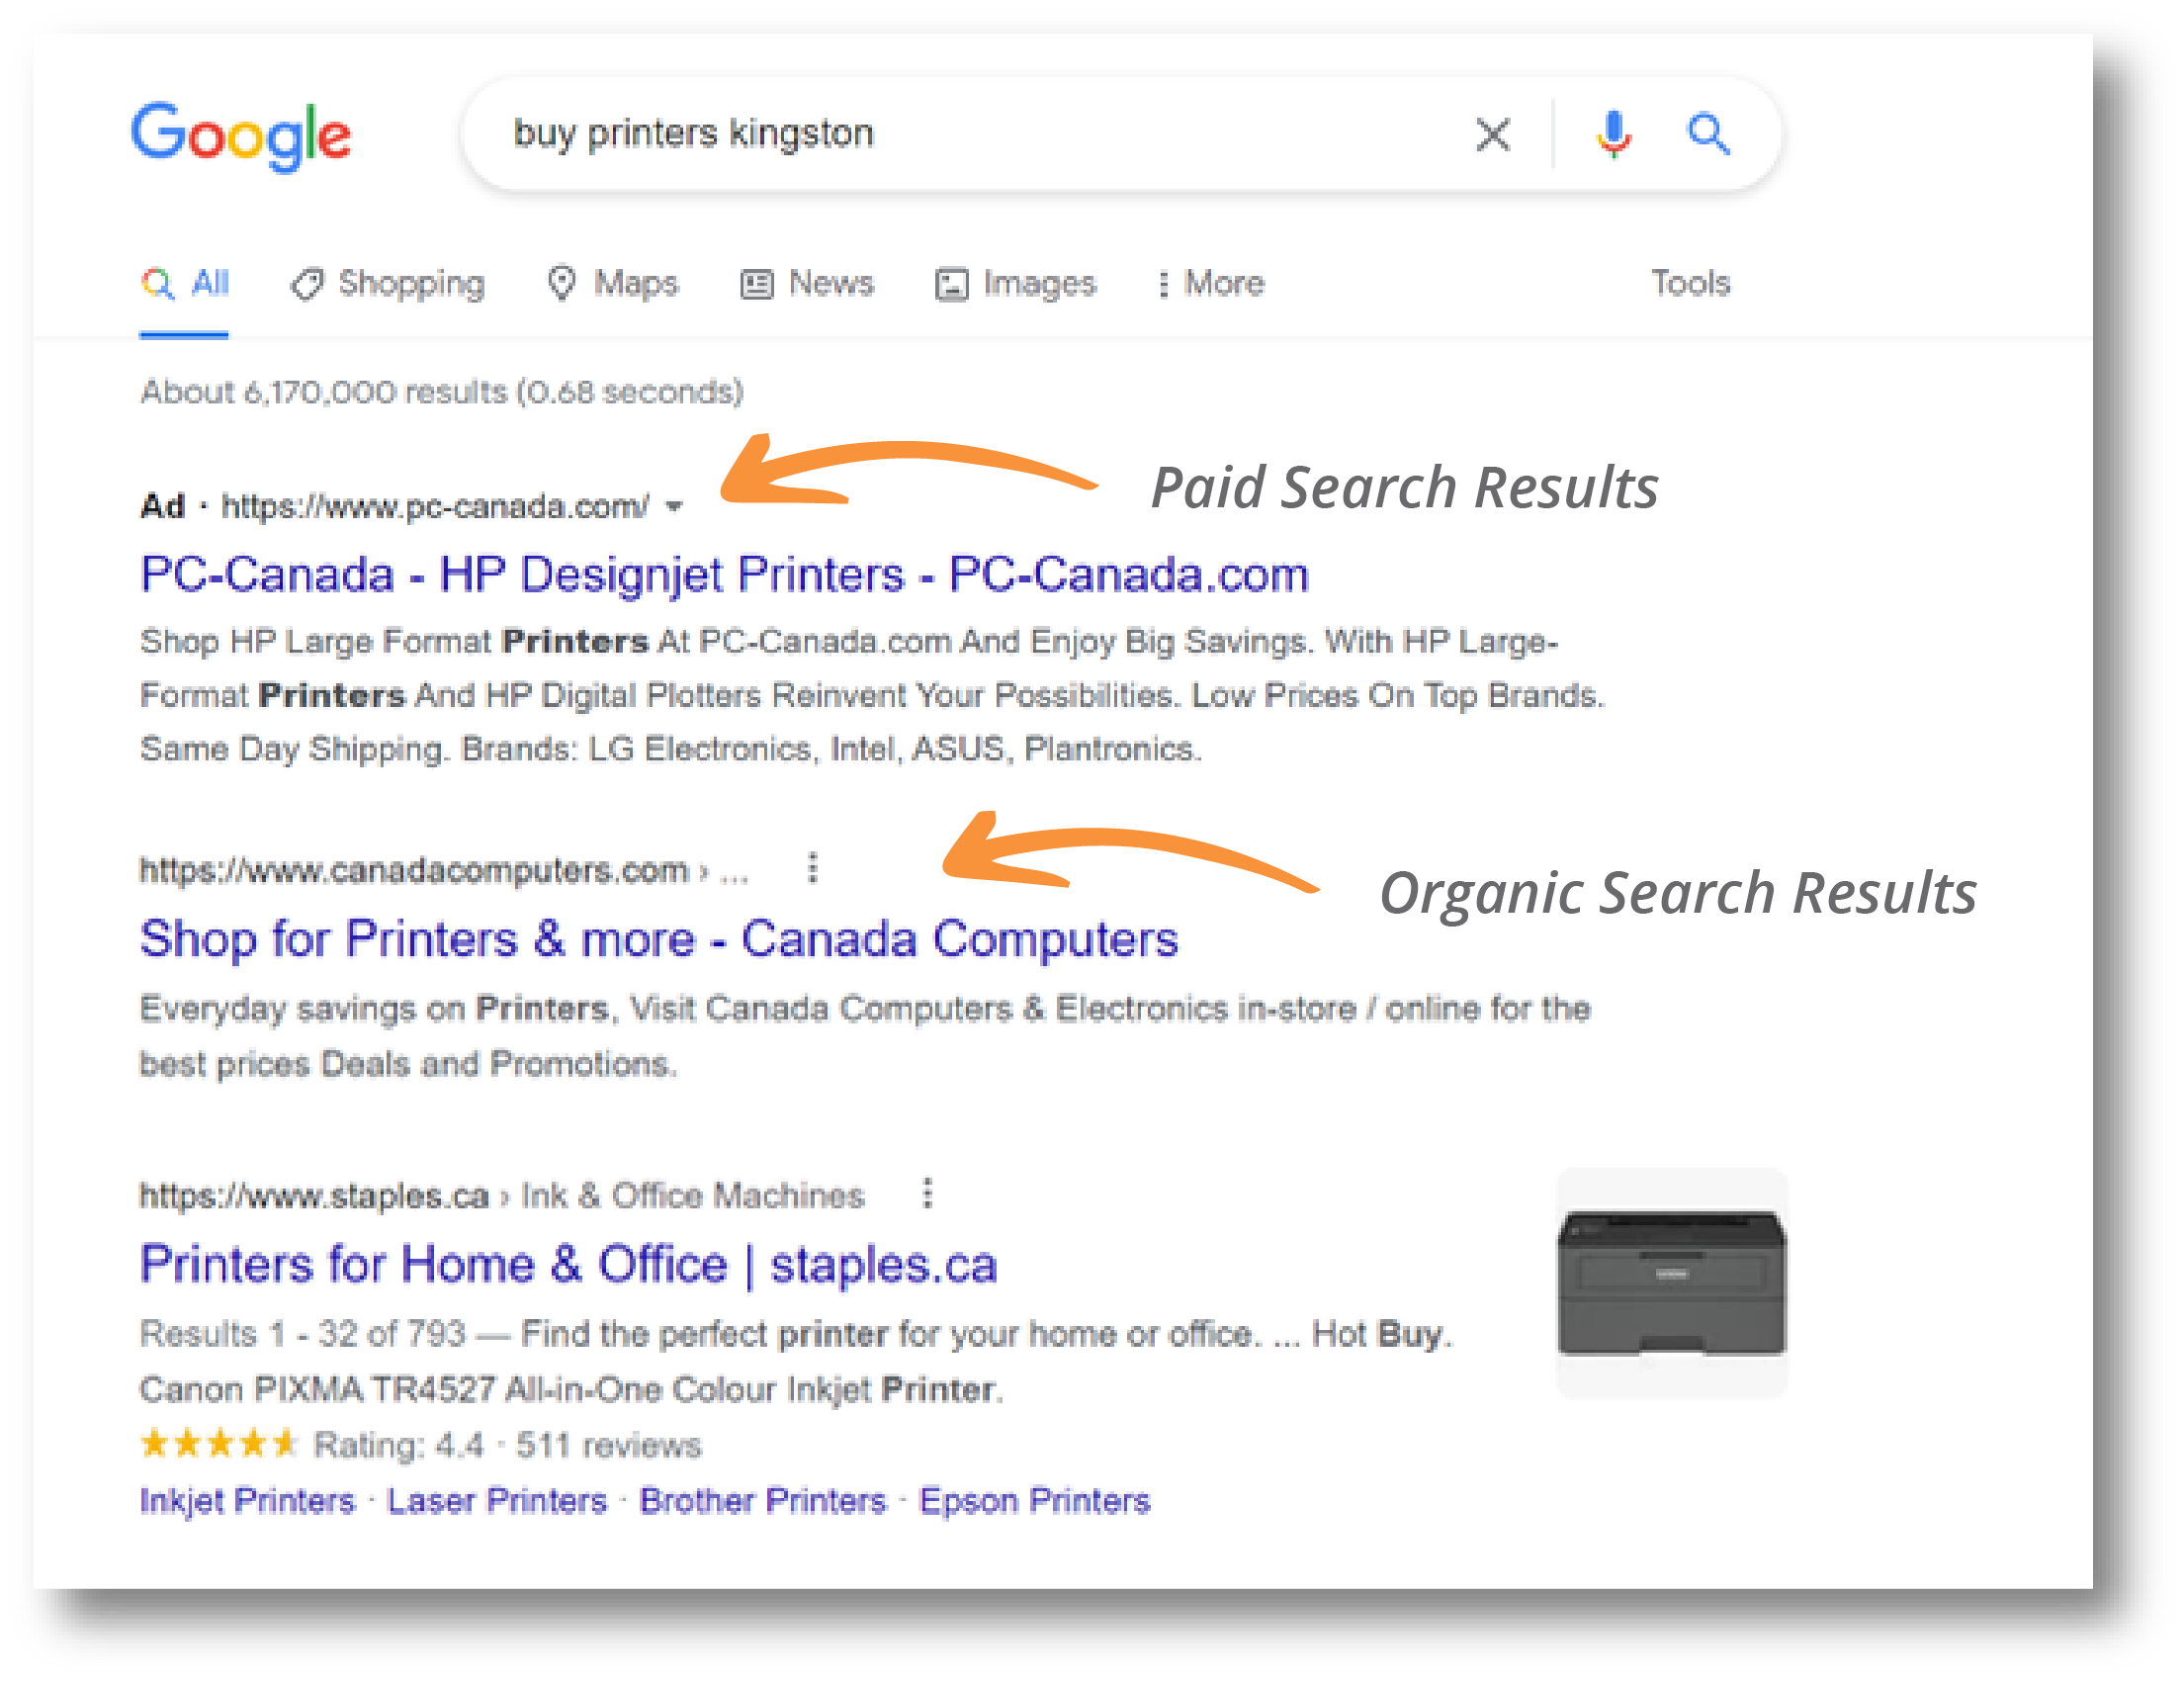 Organic search results versus paid search results in Google